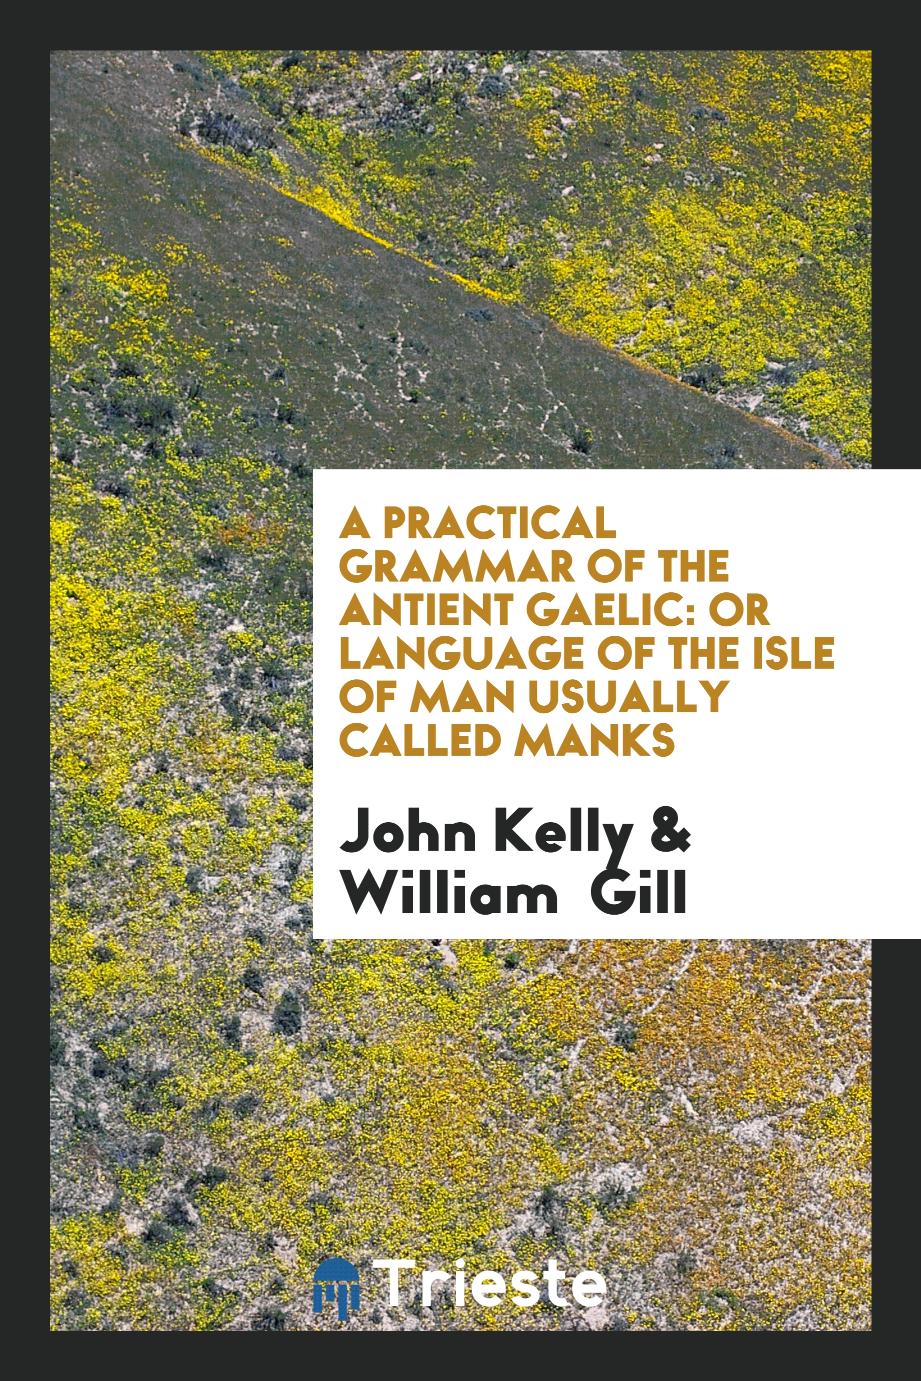 A Practical Grammar of the Antient Gaelic: Or Language of the Isle of Man Usually Called Manks